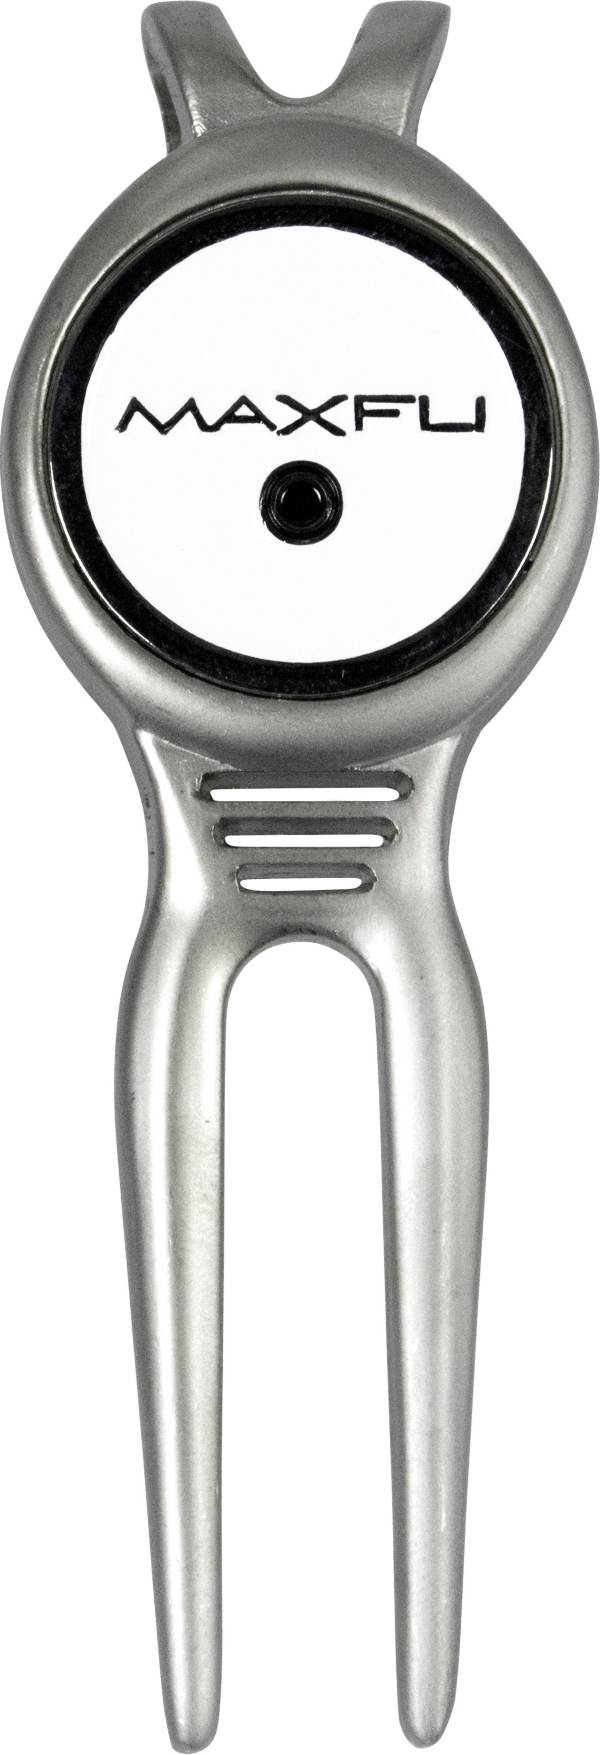 Maxfli Deluxe Divot Tool - Silver product image